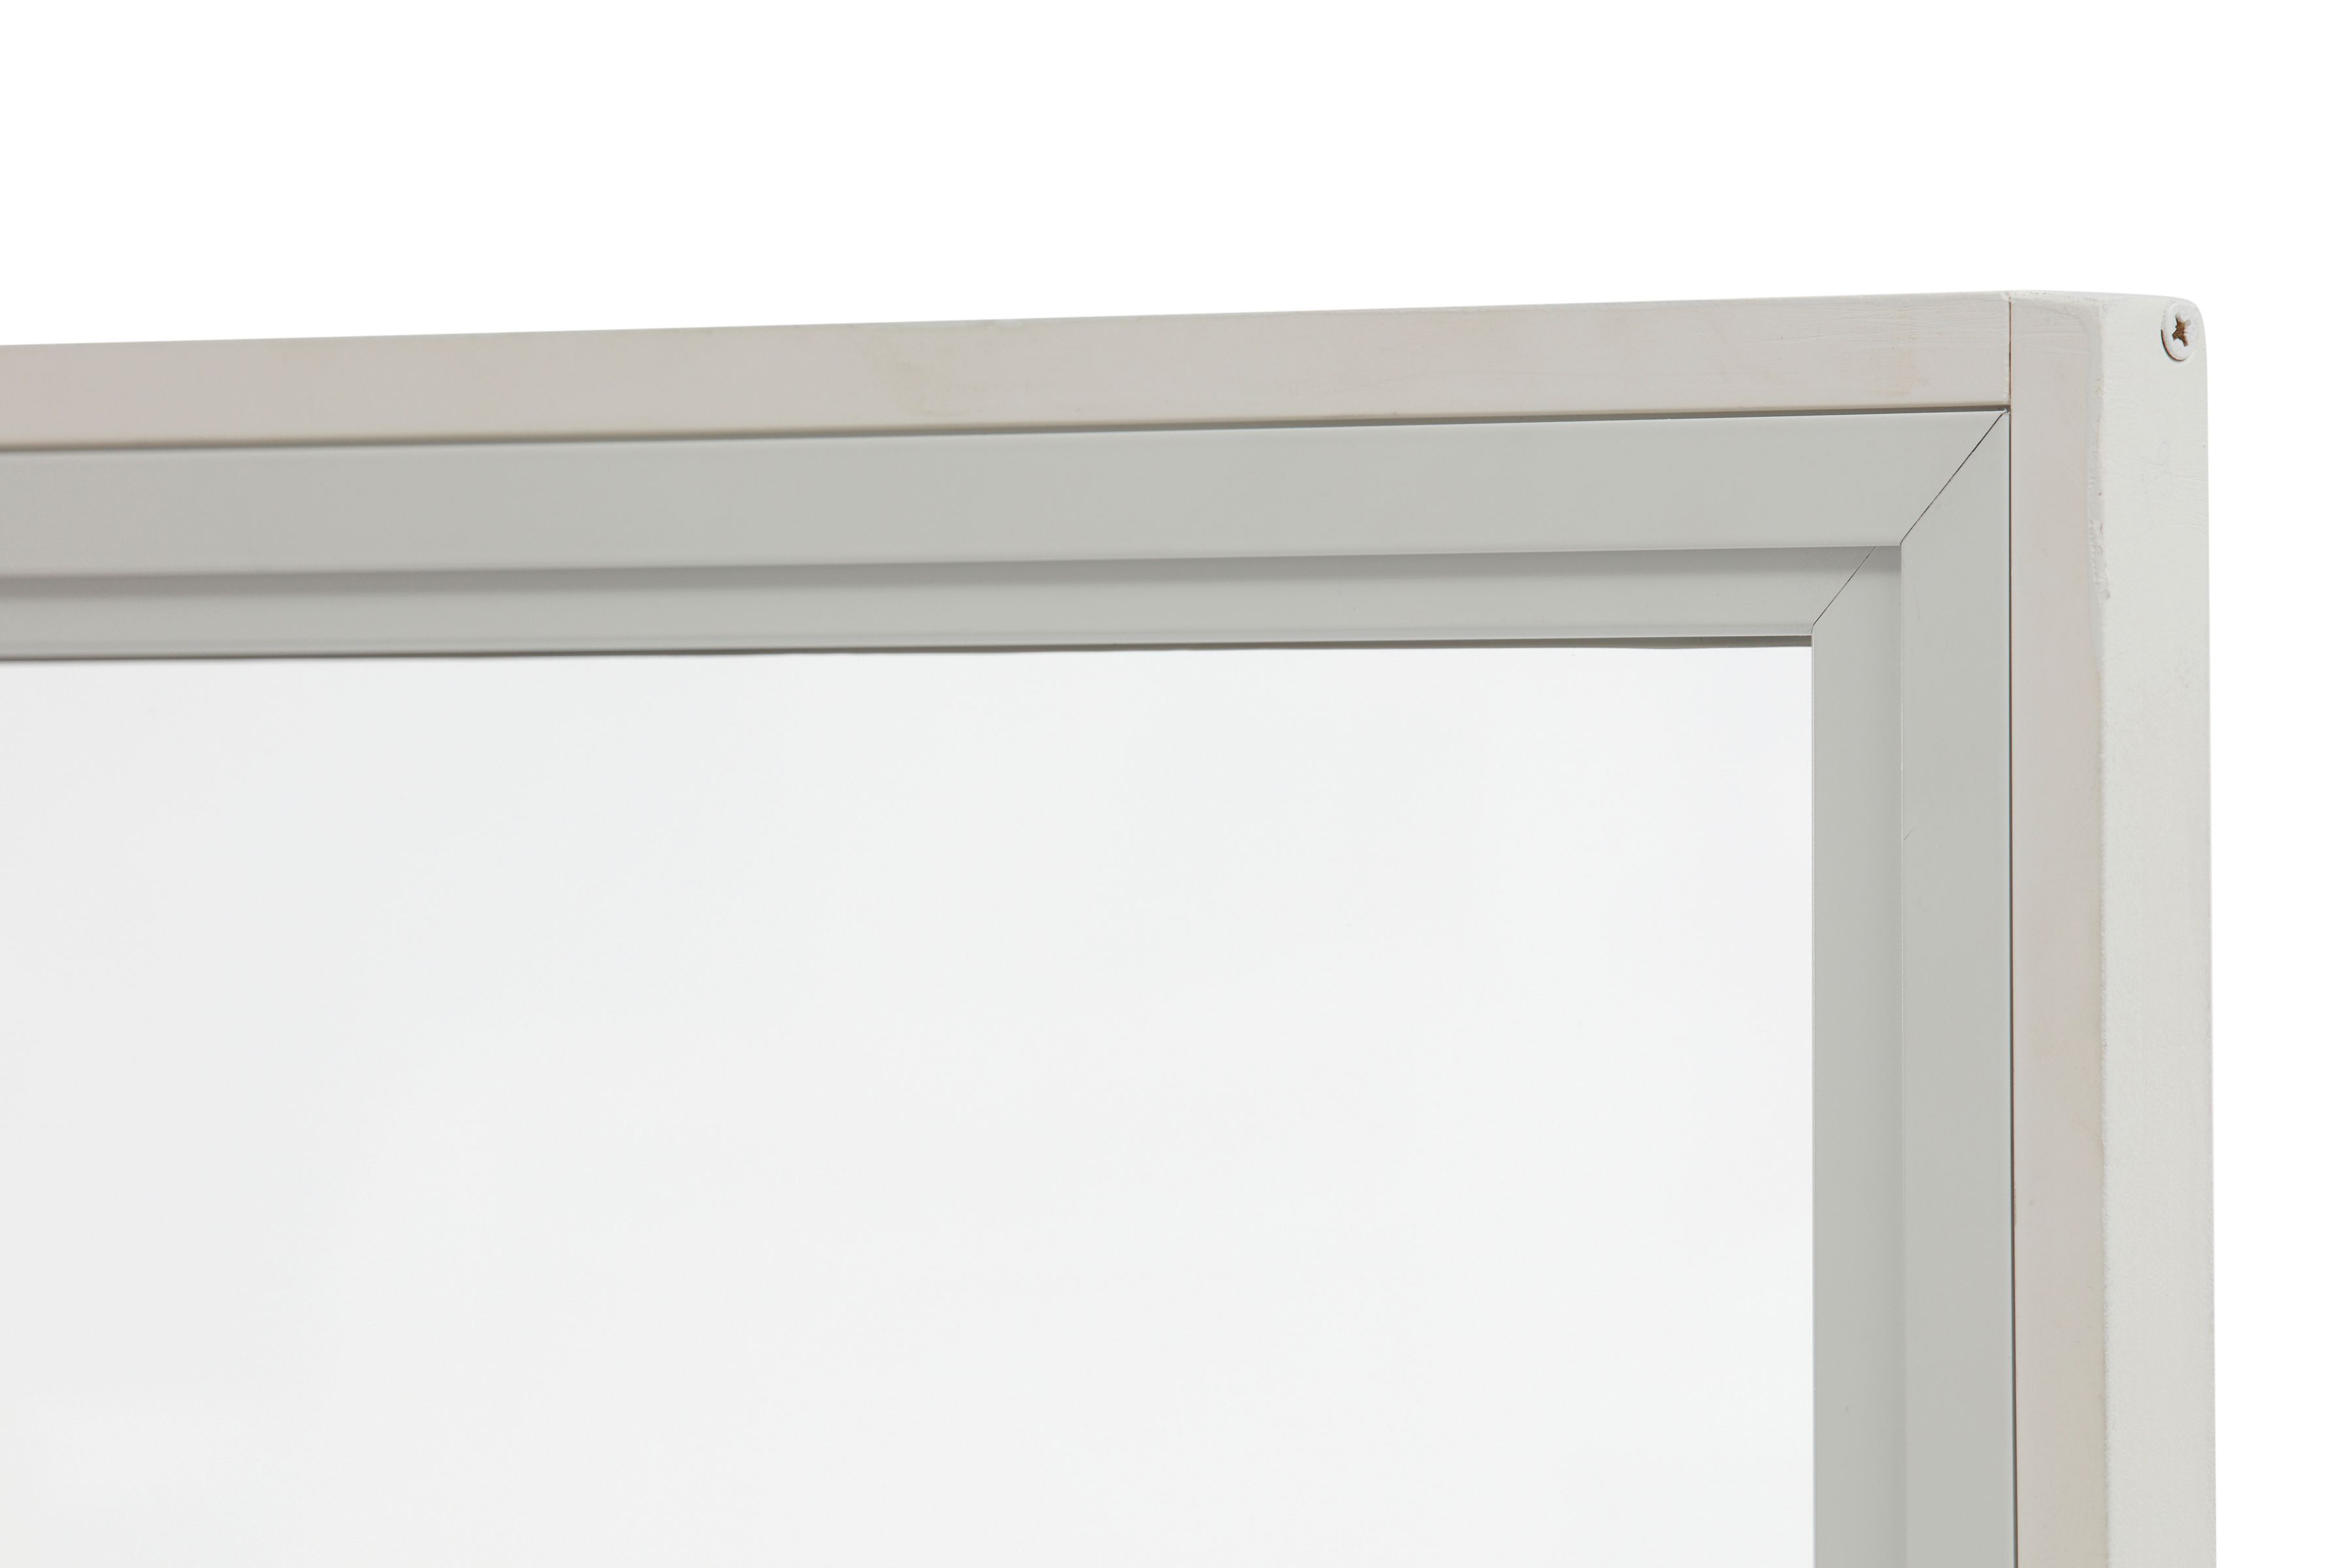 Lift Out secondary glazing unit from Omega Build